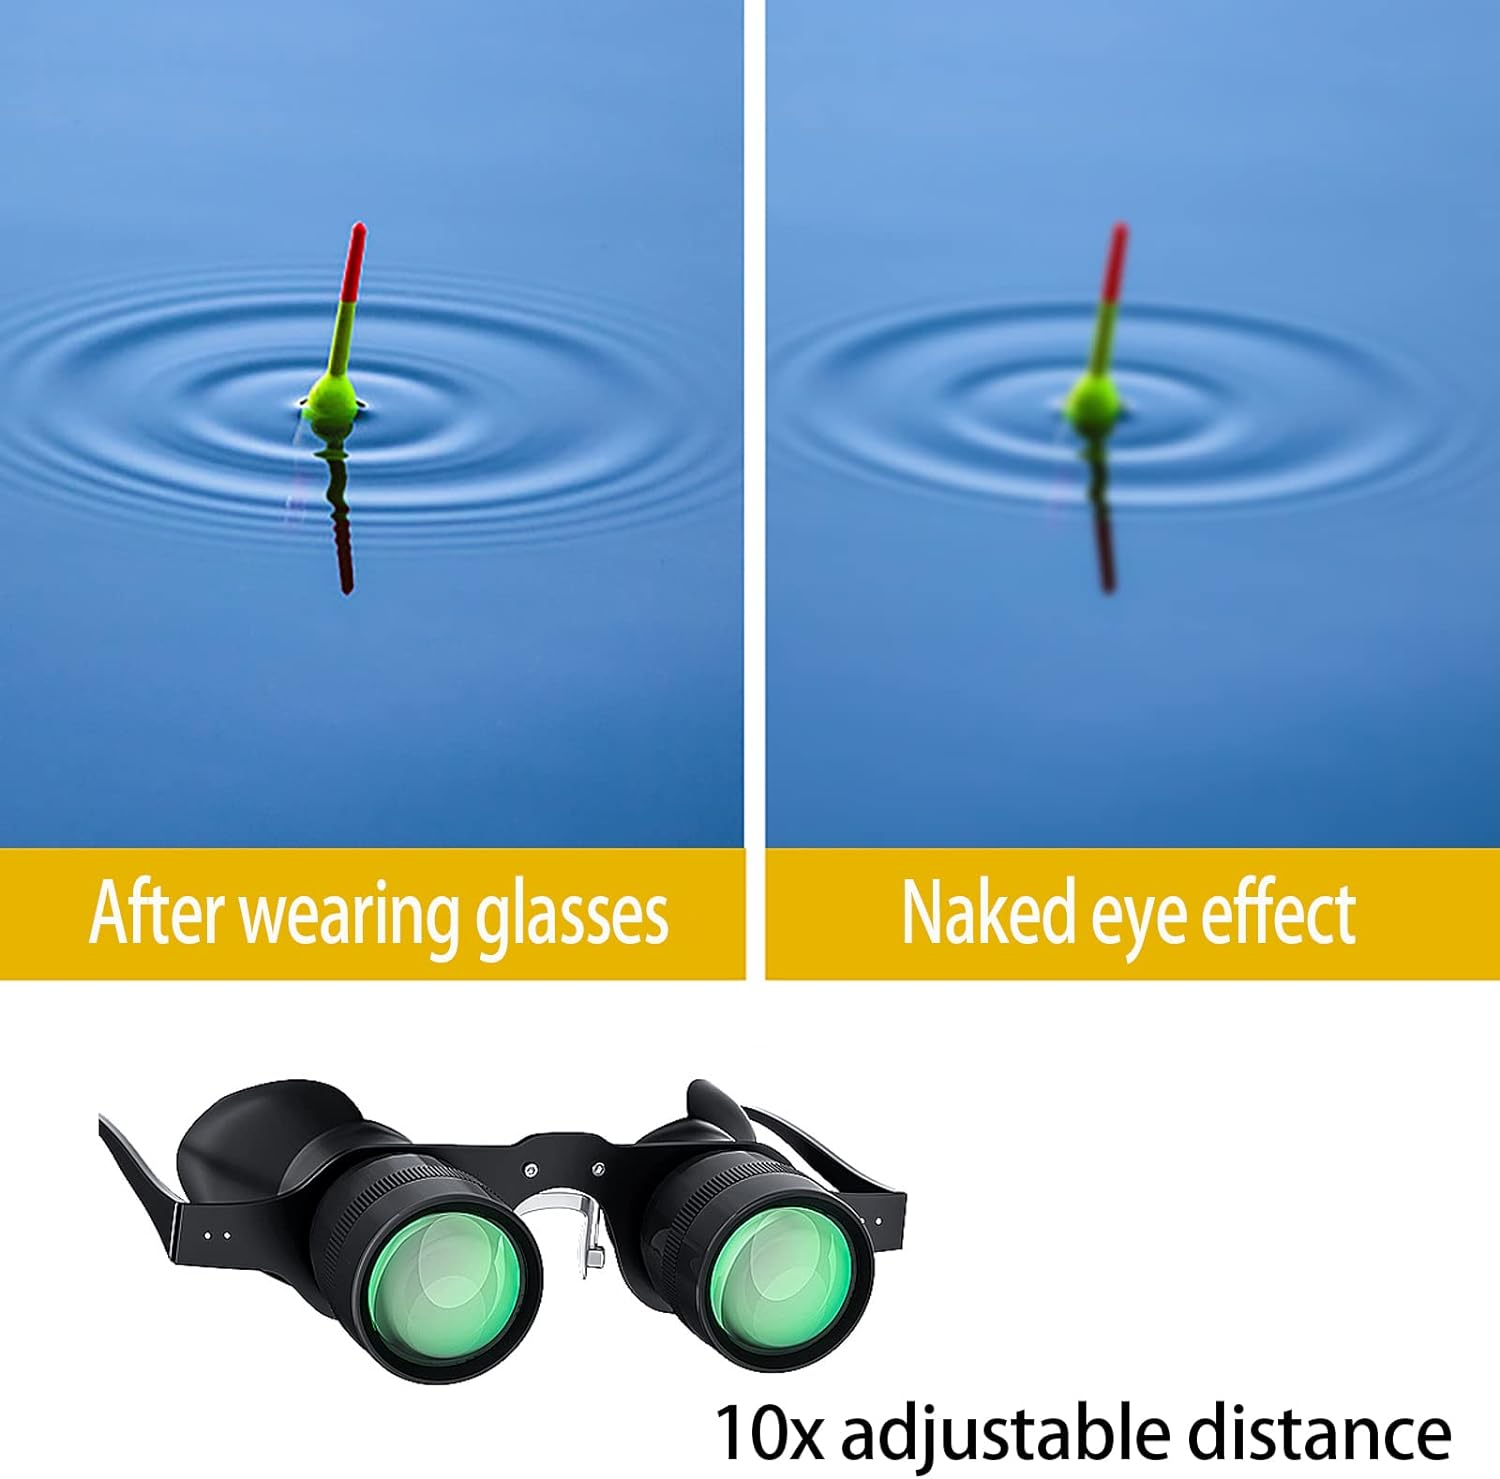 Fishing Binoculars - Professional Hands-Free Glasses for Bird Watching, Sports, Concerts, Theater, and Sightseeing, HD Portable Telescope and Opera Glasses with 2 Polarized Lenses